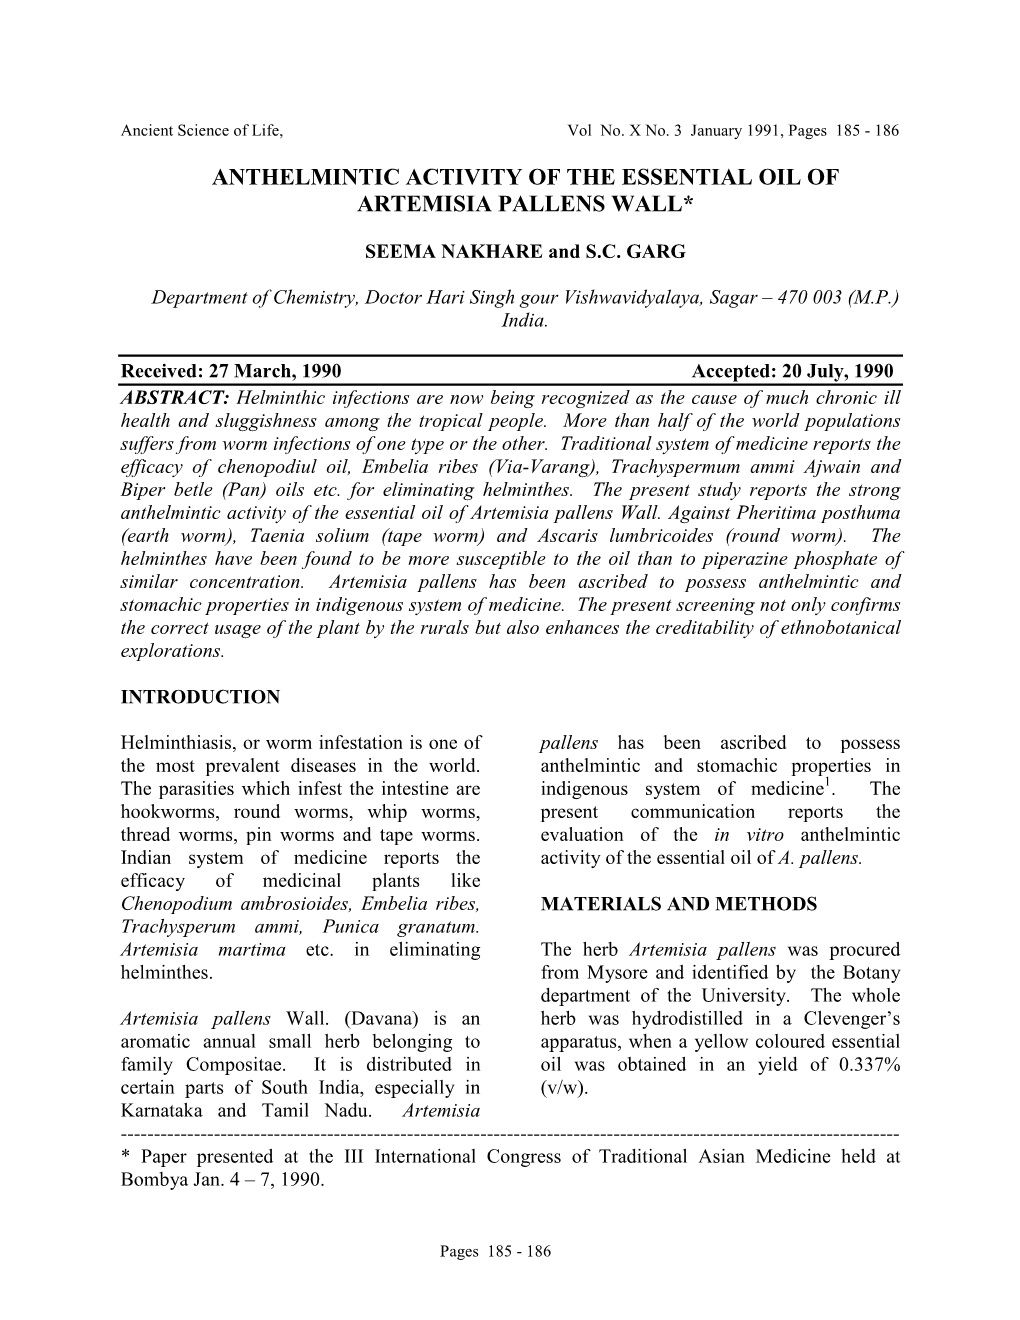 Anthelmintic Activity of the Essential Oil of Artemisia Pallens Wall*